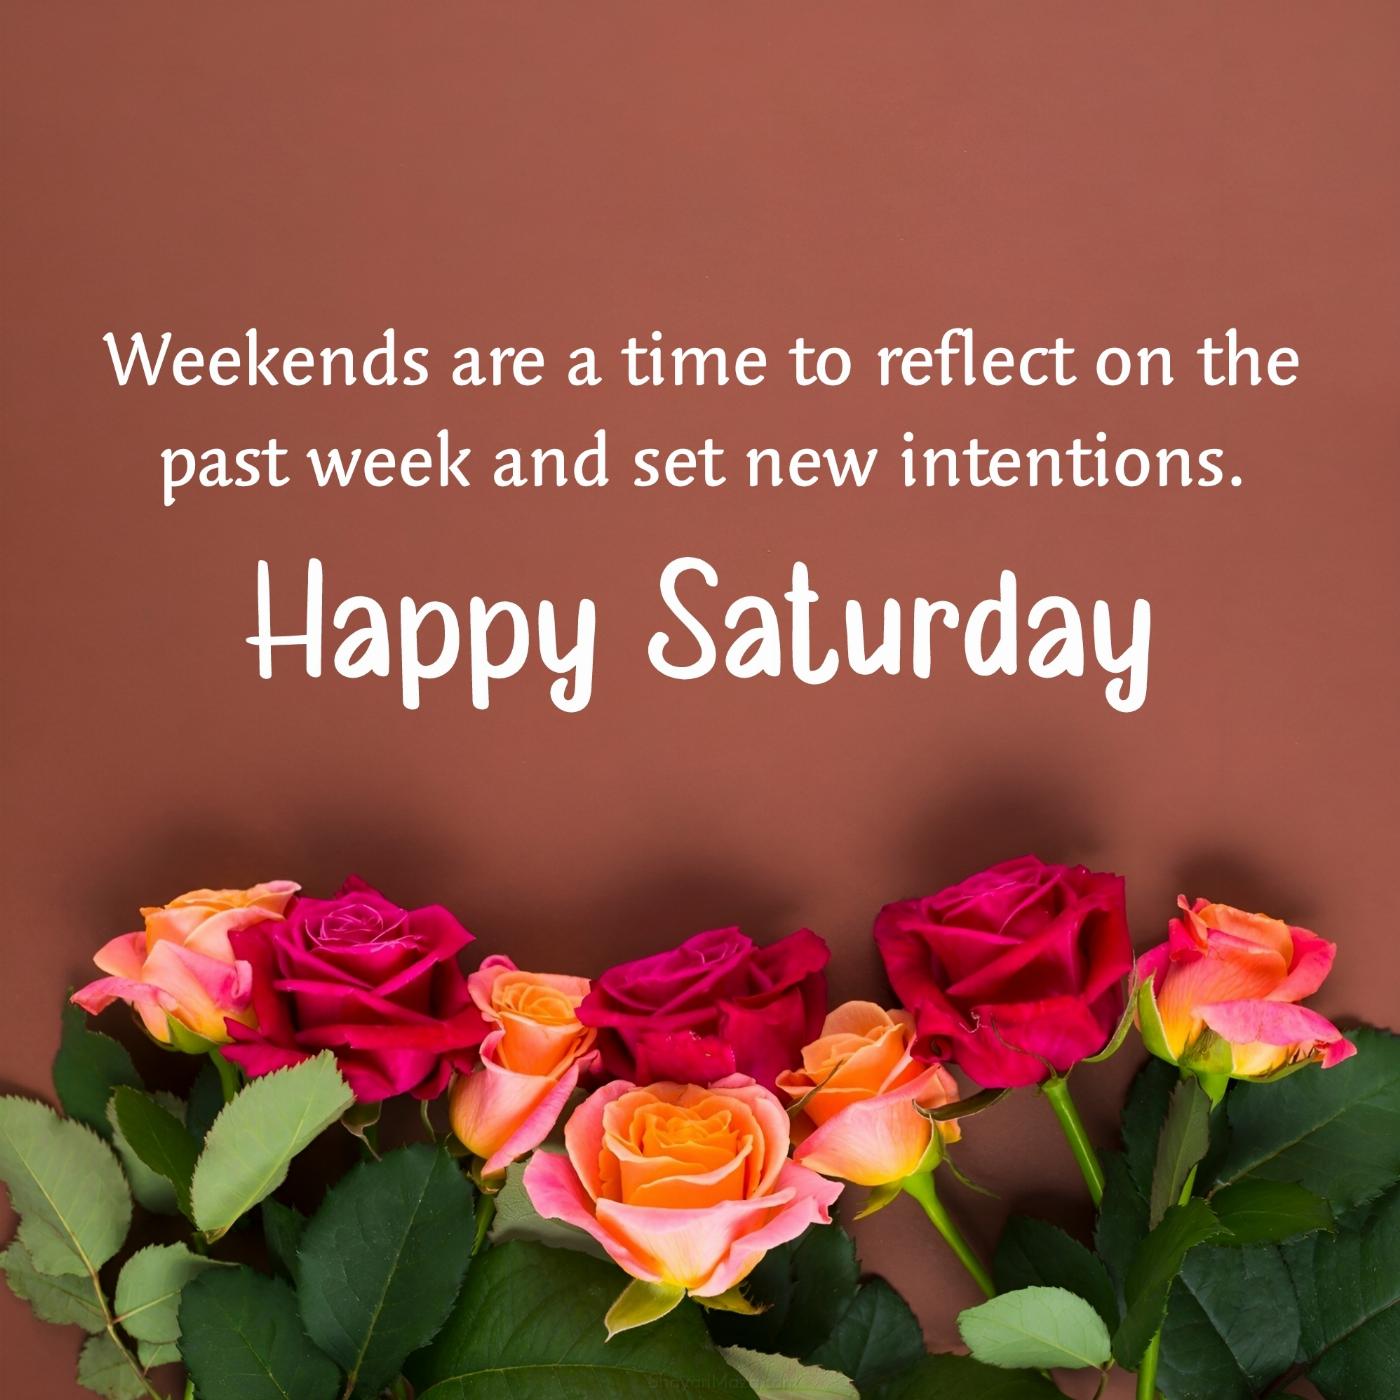 Weekends are a time to reflect on the past week and set new intentions